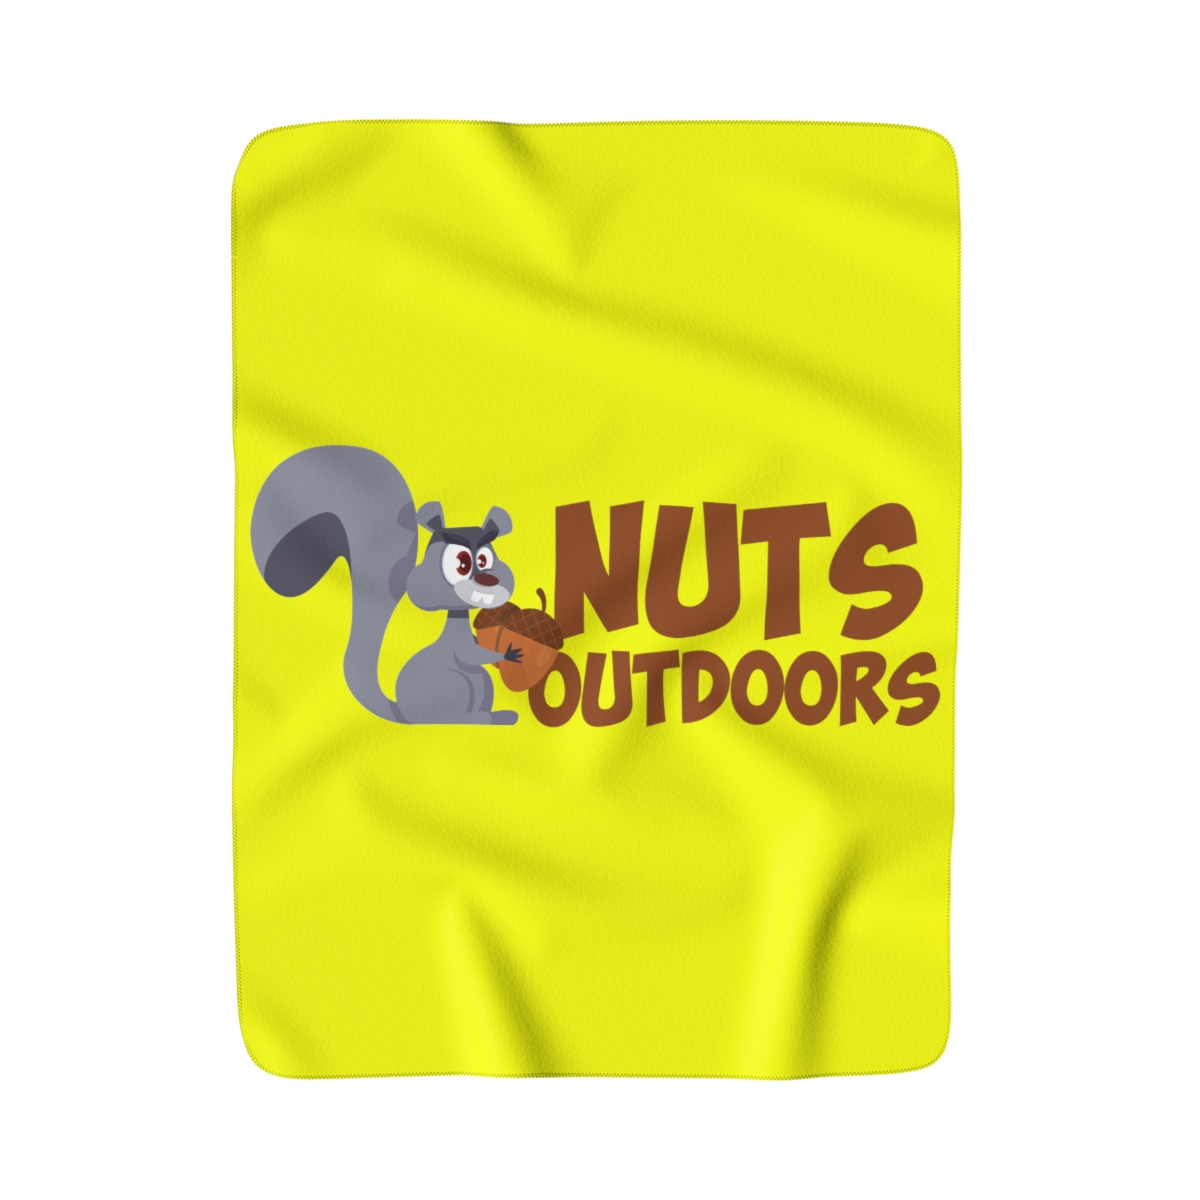 Nuts Outdoors - Classic Nuts Outdoors Sherpa Fleece Blanket - Nuts Outdoors